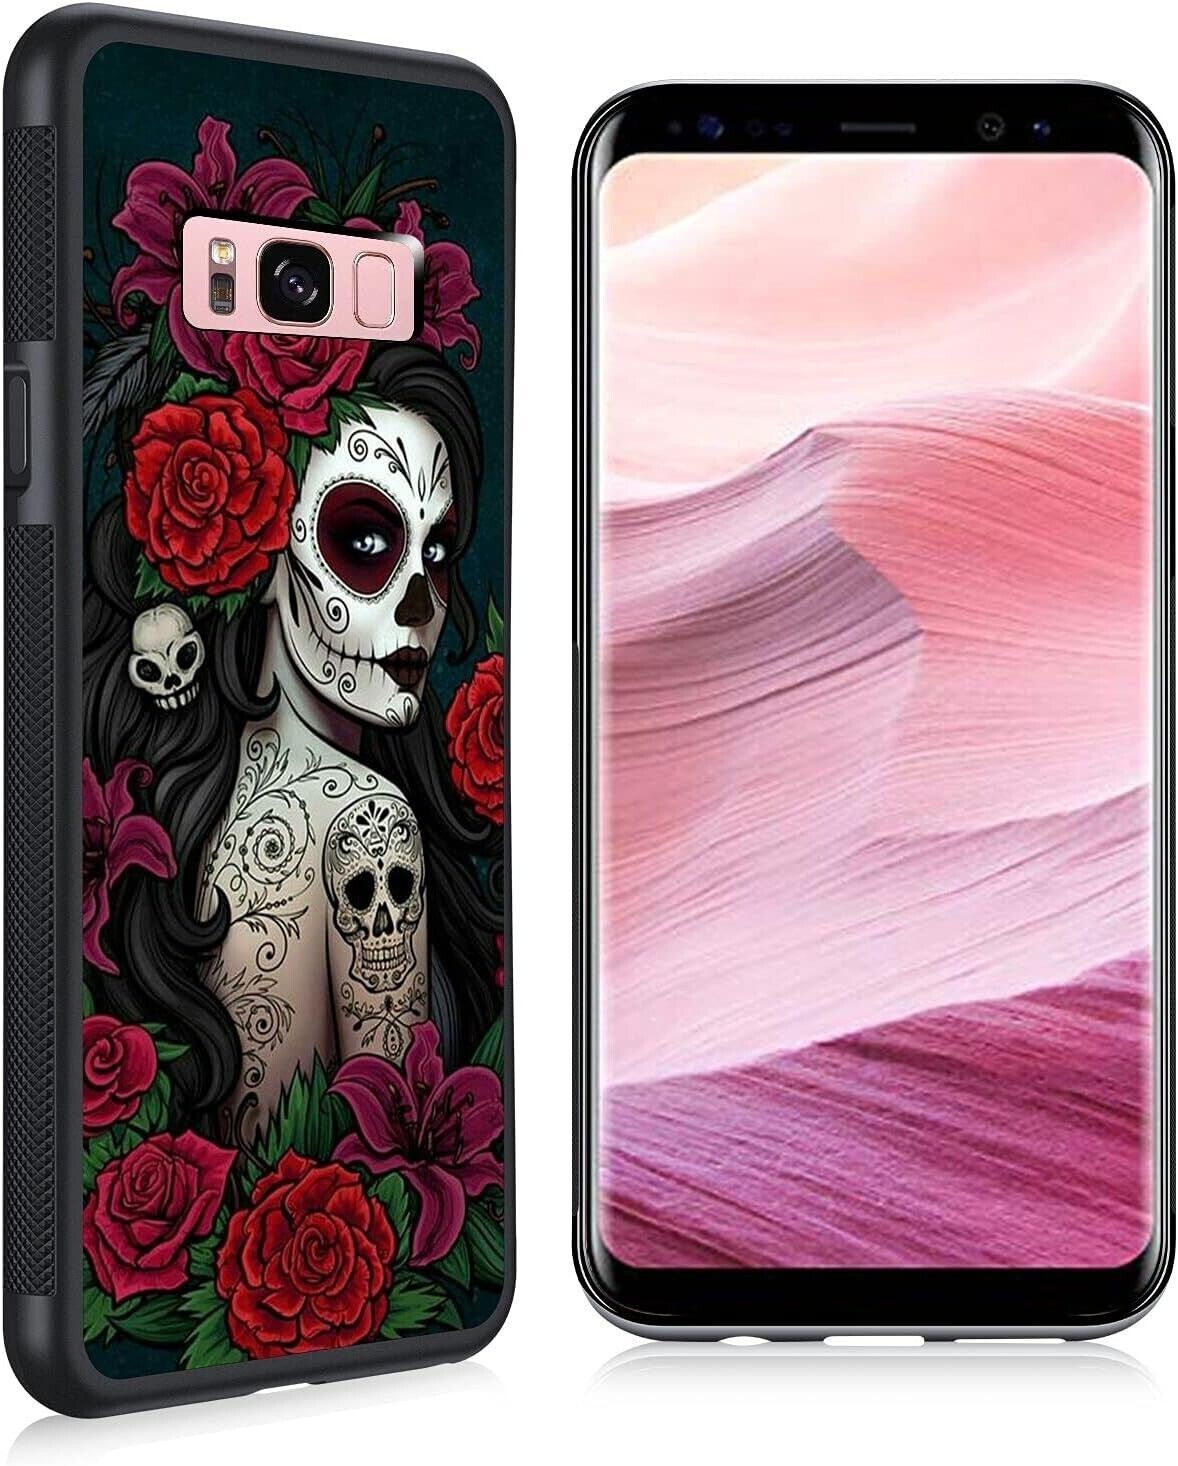 For Samsung Galaxy S8 Sugar Skull Girl Roses Slim Fit Protective Cover Case - $12.86